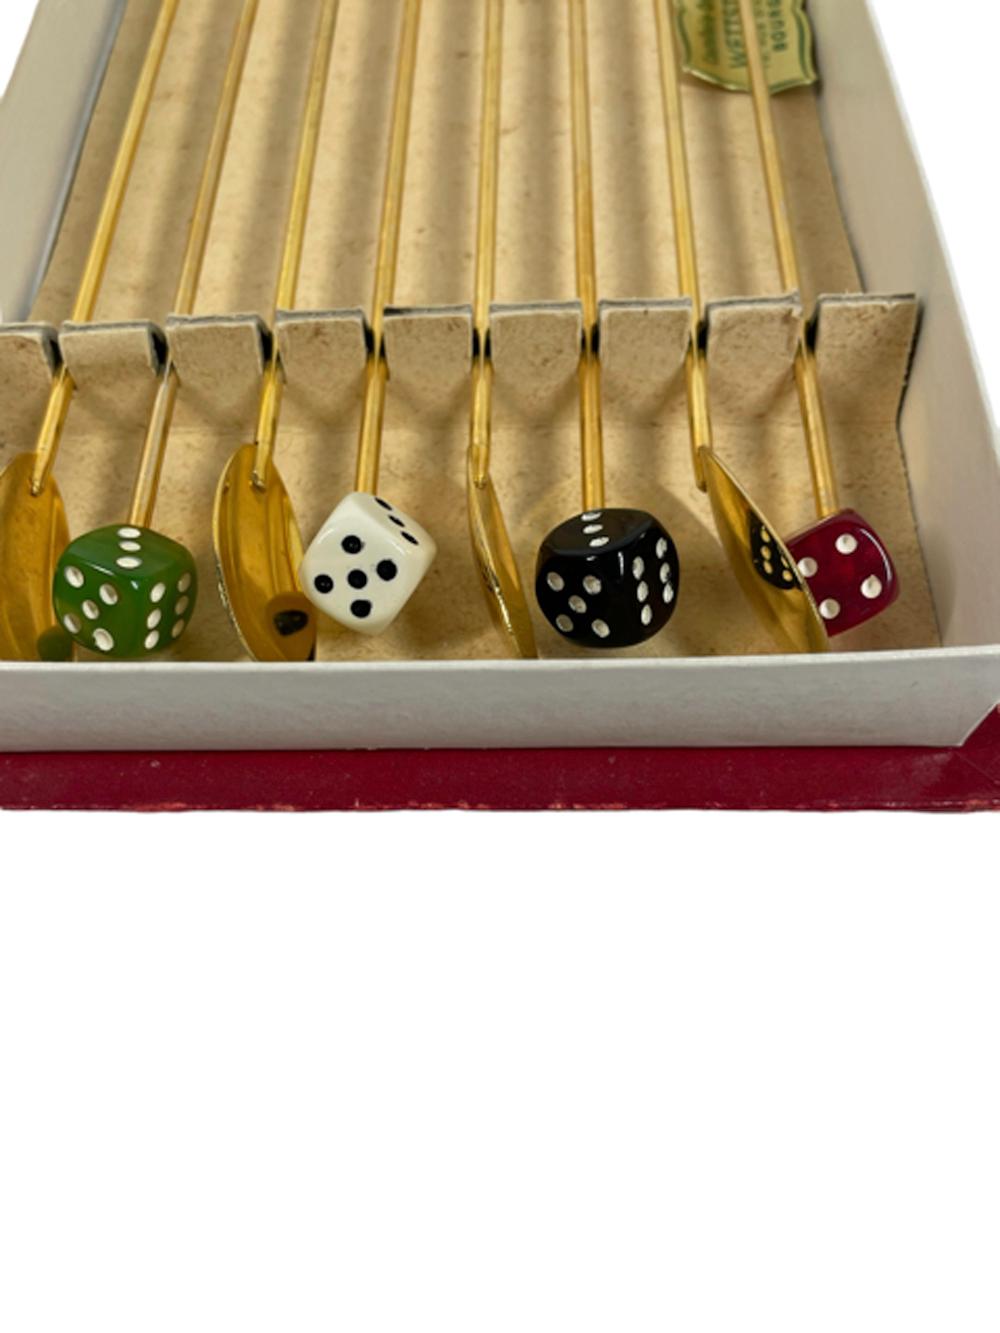 Vintage Bakelite dice topped gold-toned cocktail/drink stirrers in their original packaging. Each stir spoon with different color Bakelite dice tops, some are translucent and opaque versions of the same color. Package marked 